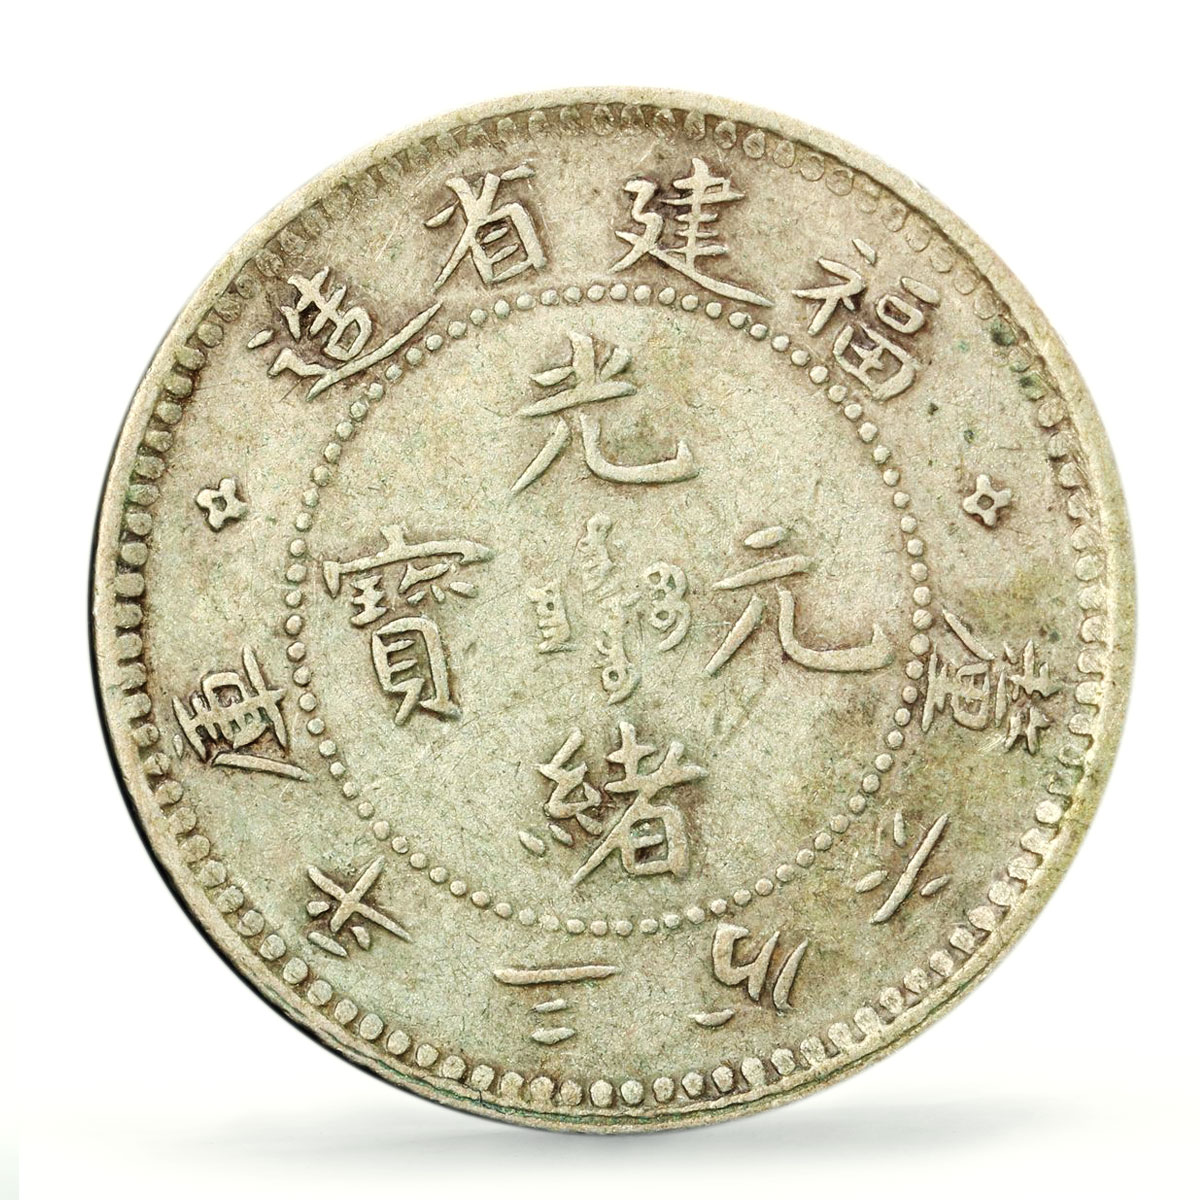 China Fukien 5 cents Regular Coinage Dragon No Rosette XF40 PCGS silver coin ND